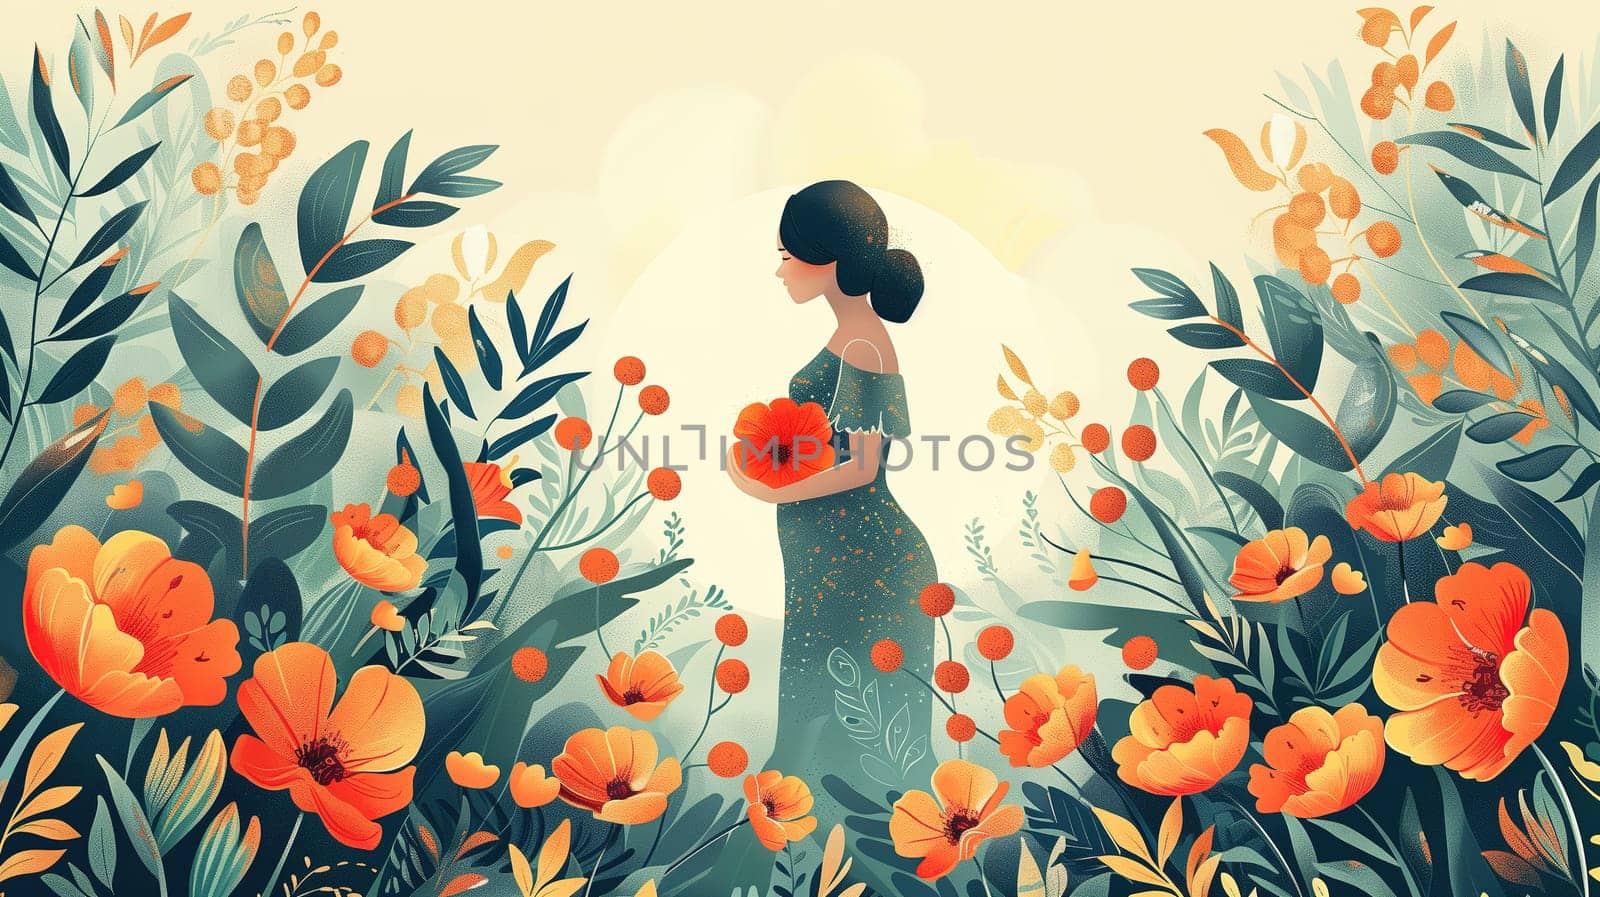 A painting depicting a woman standing in the midst of a vibrant field of flowers. She is the central focus, surrounded by a variety of colorful blooms under a bright sky.